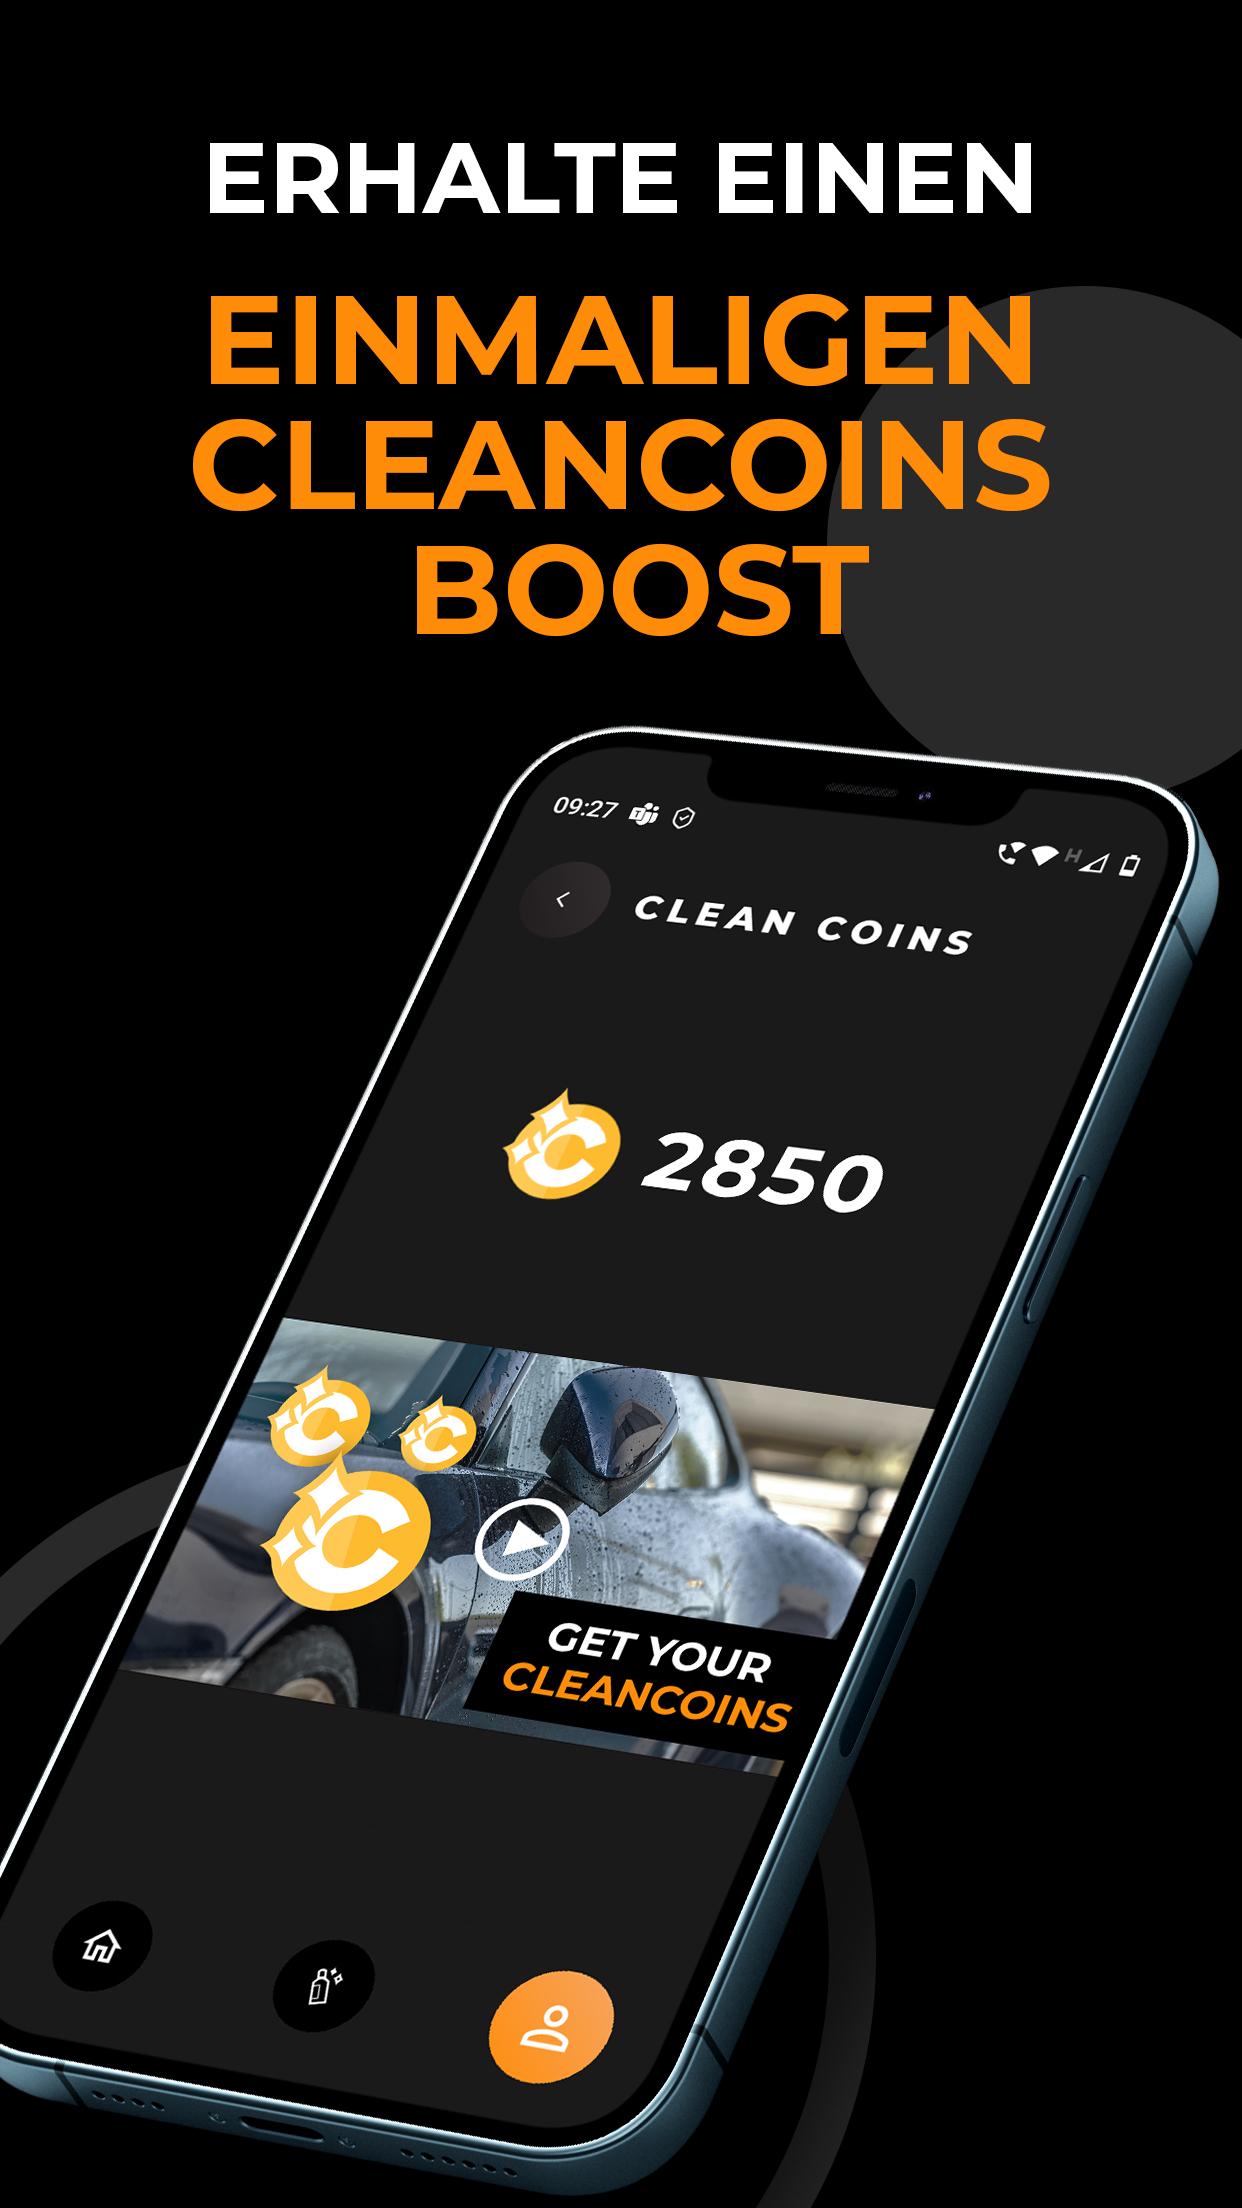 CarCare App by Area52 1.0.9 Screenshot 4